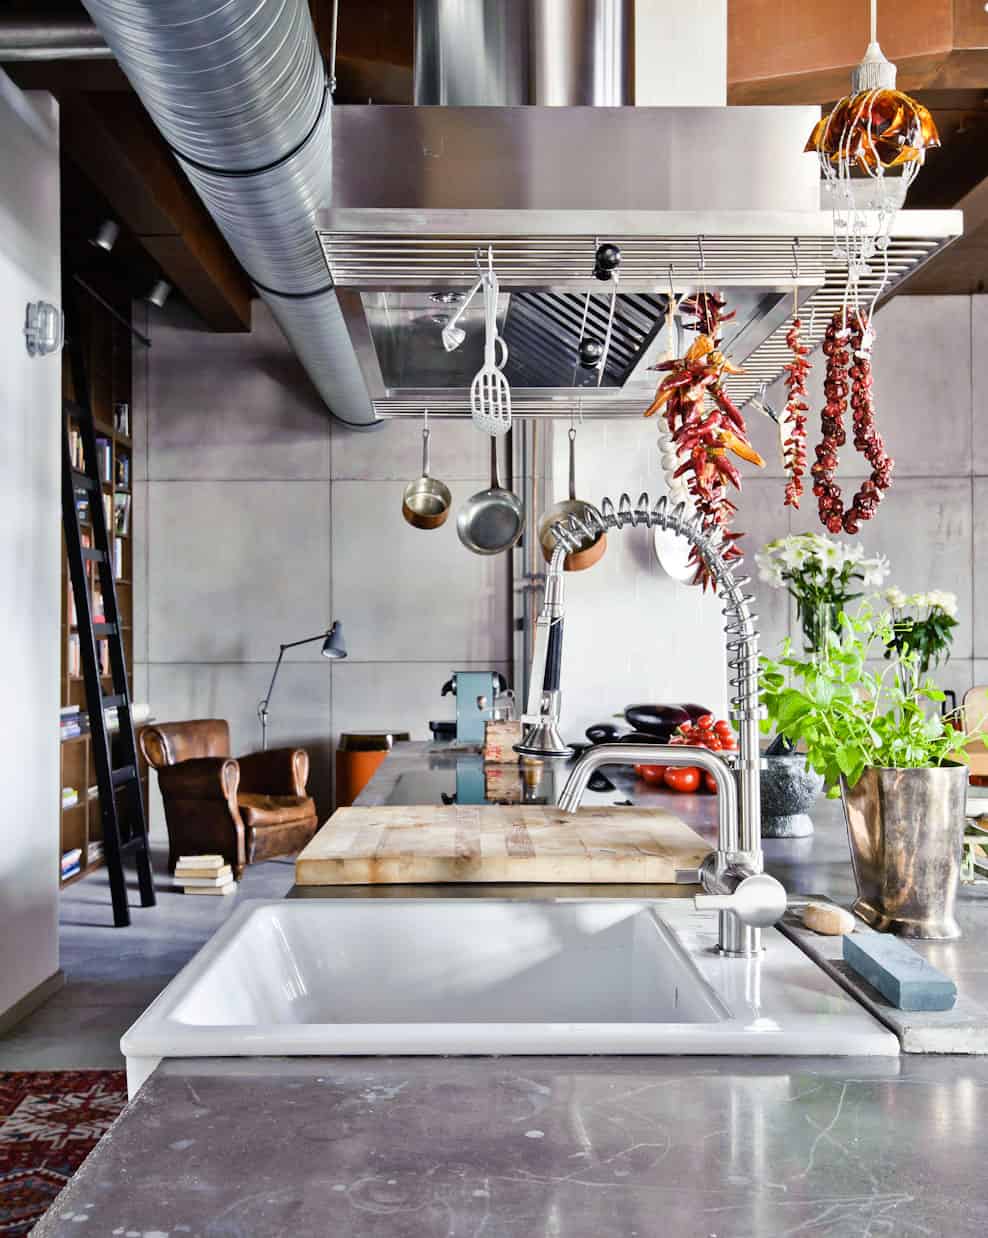 industrial-style-kitchen-for-foodies-with-good-taste-budapest-3.jpg